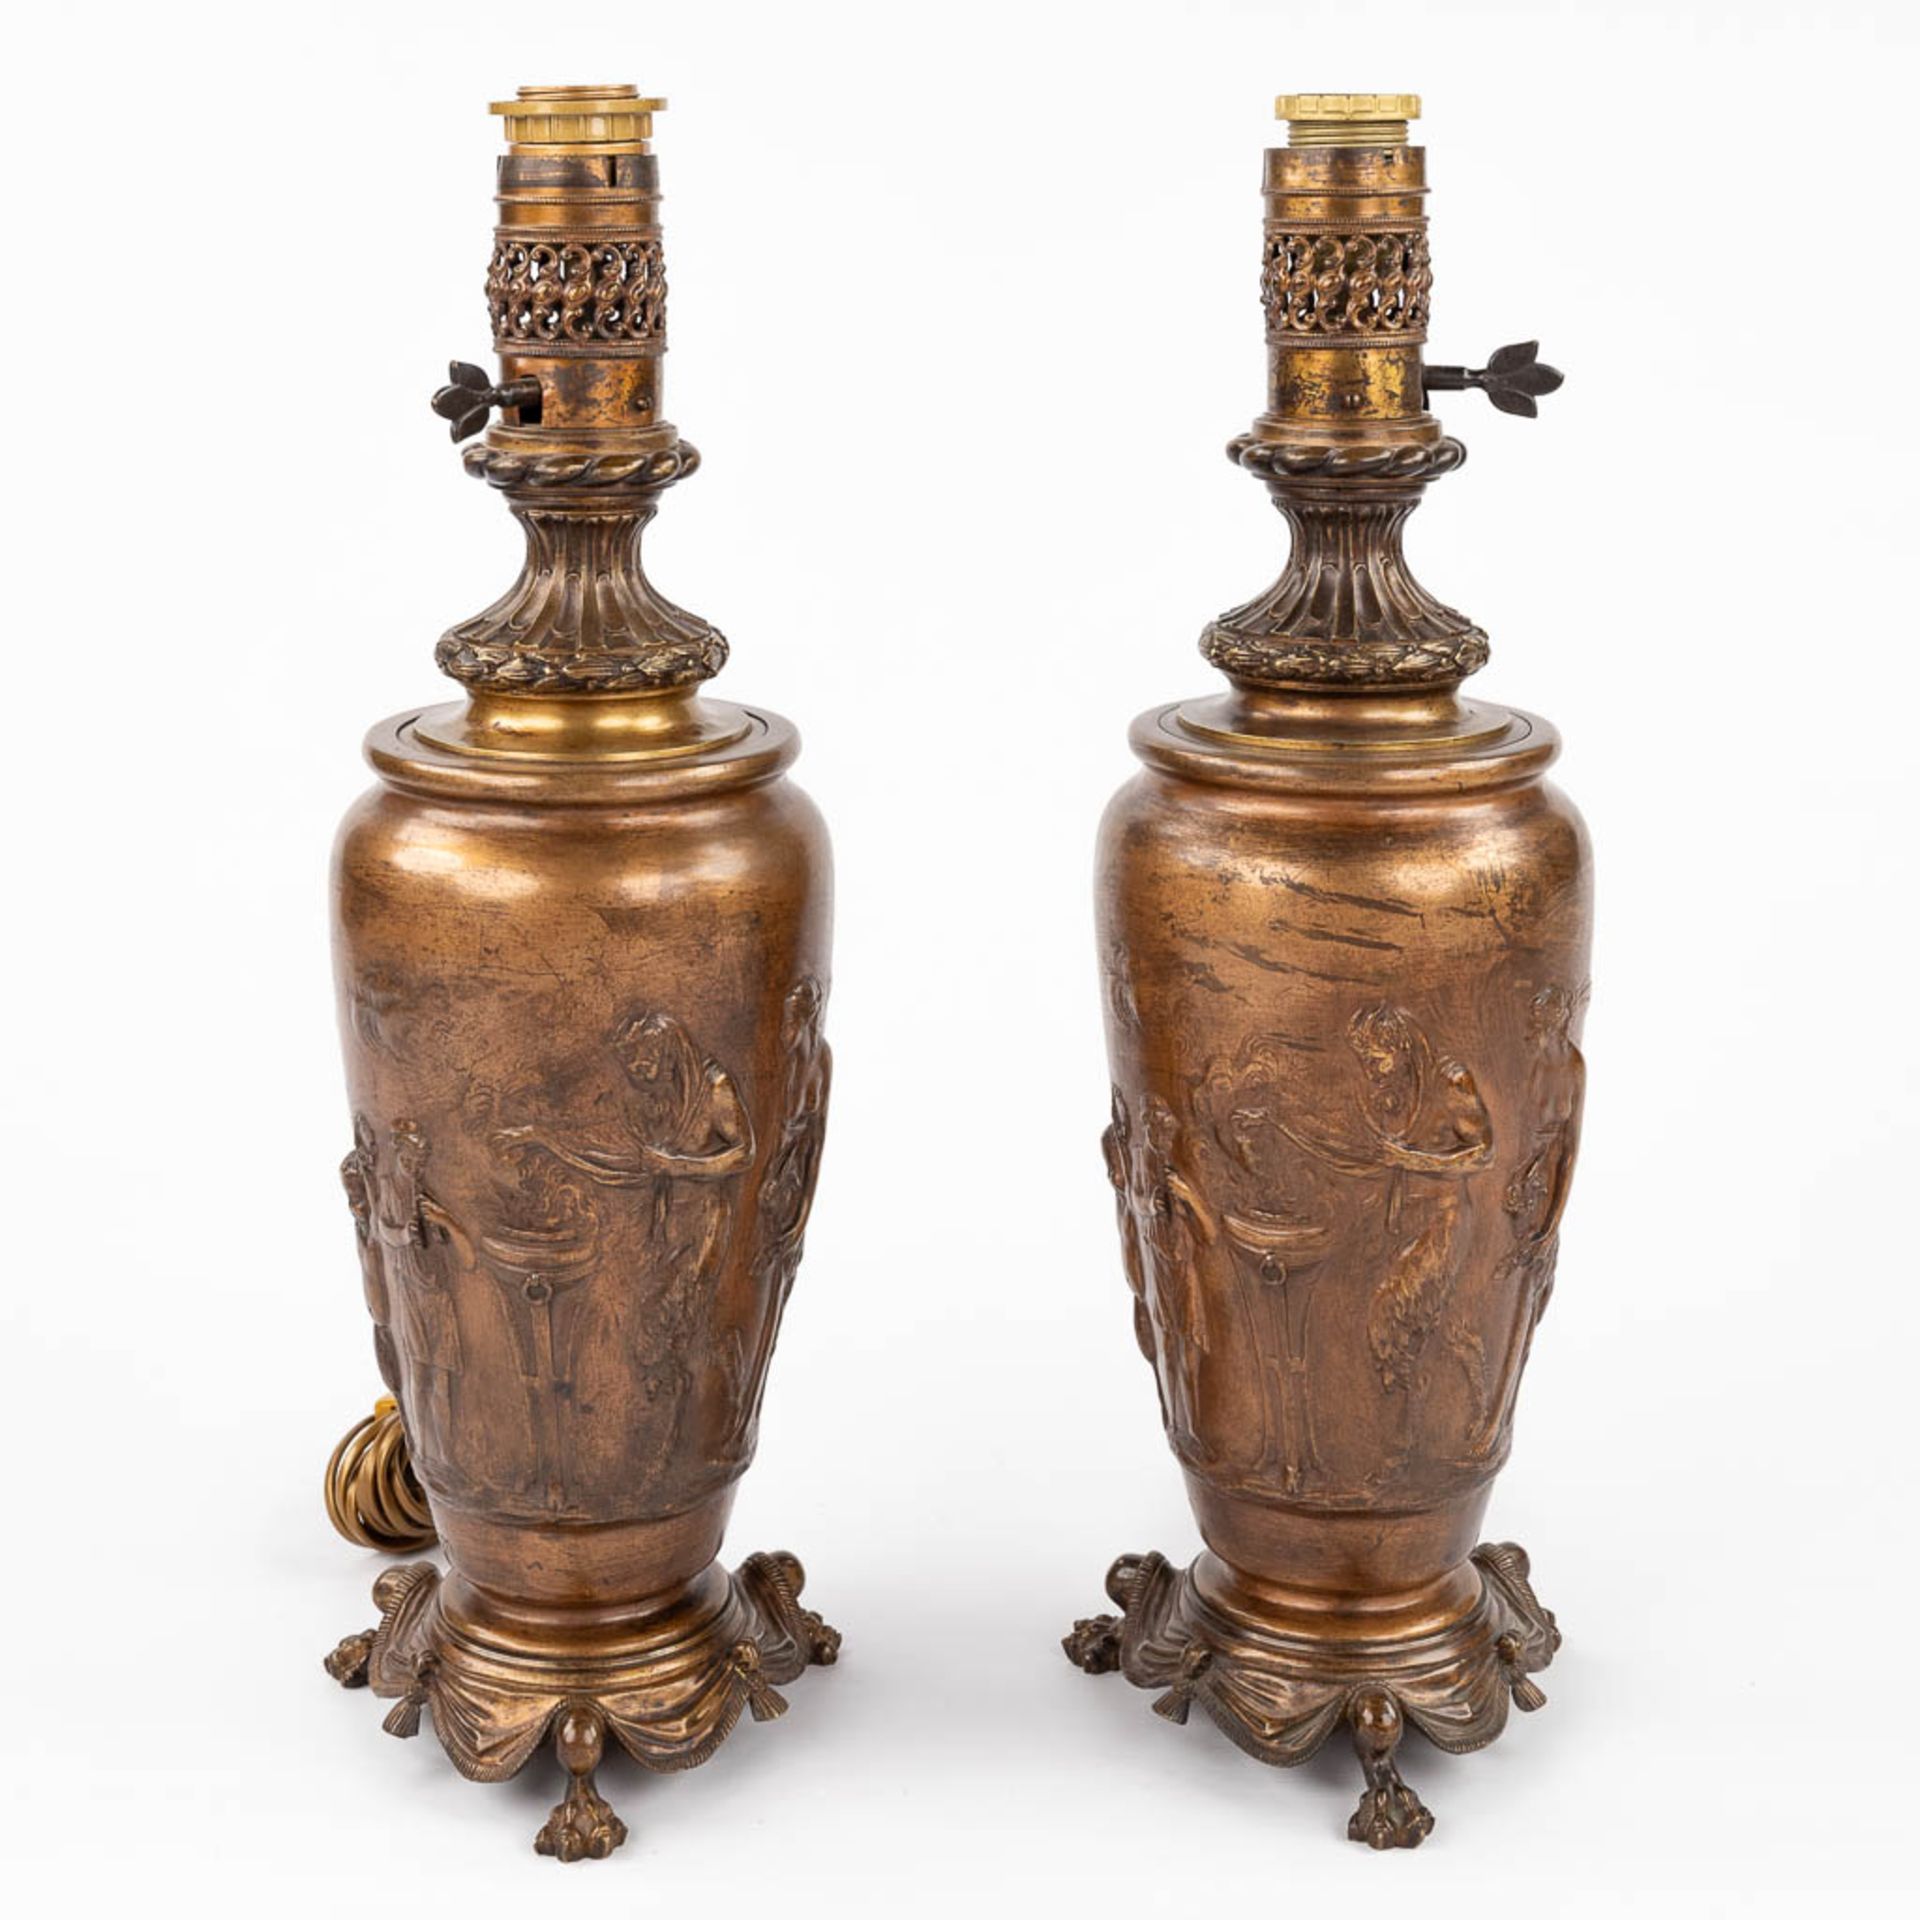 CLODION (1738-1814) 'Pair of oil lamps' bronze decorated with Satyrs and Nymphs. 19th C. (H:55 x D:1 - Bild 3 aus 14